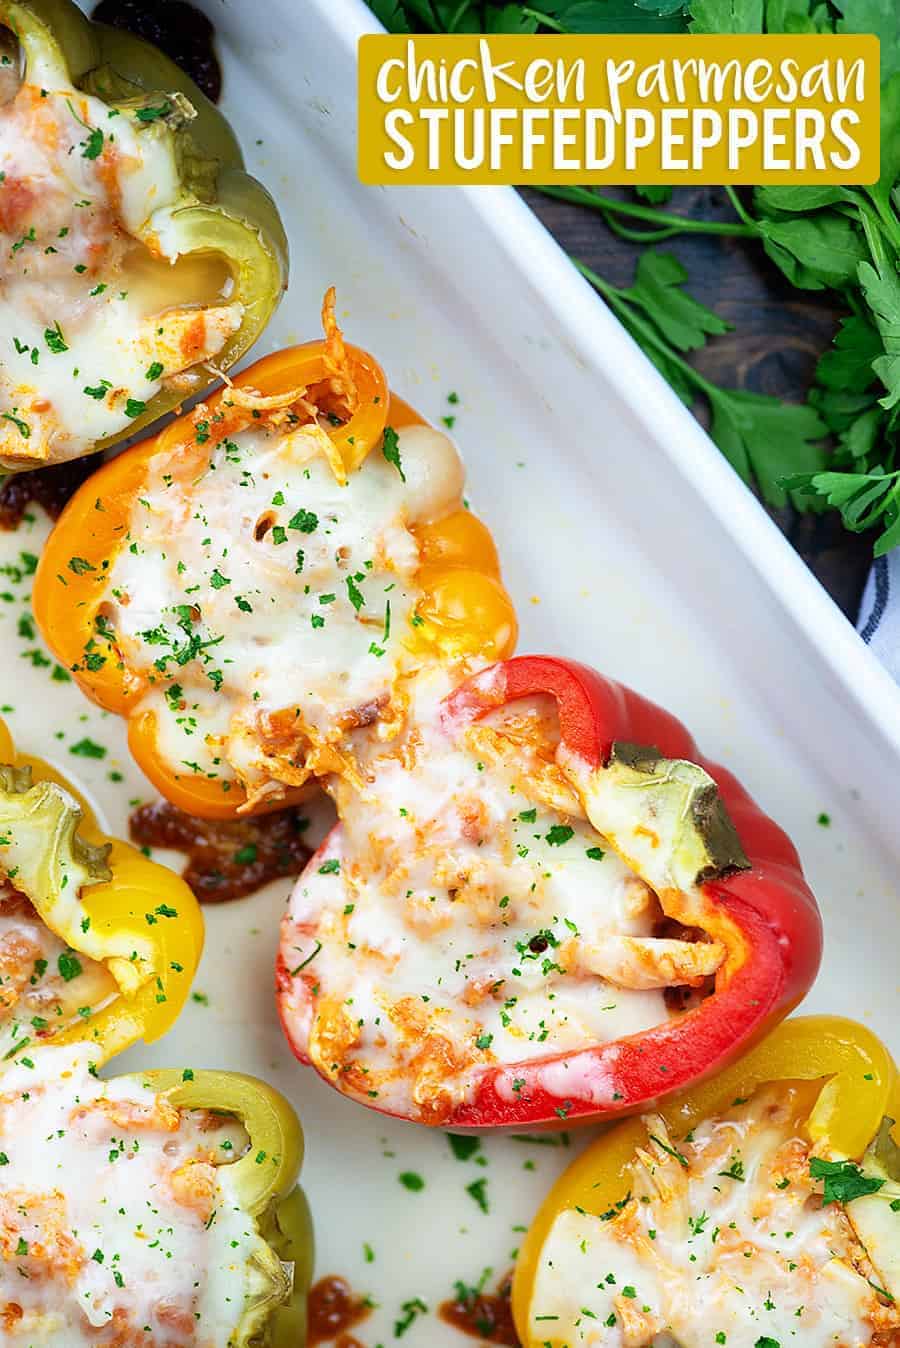 Stuffed peppers lined up in a white baking pan